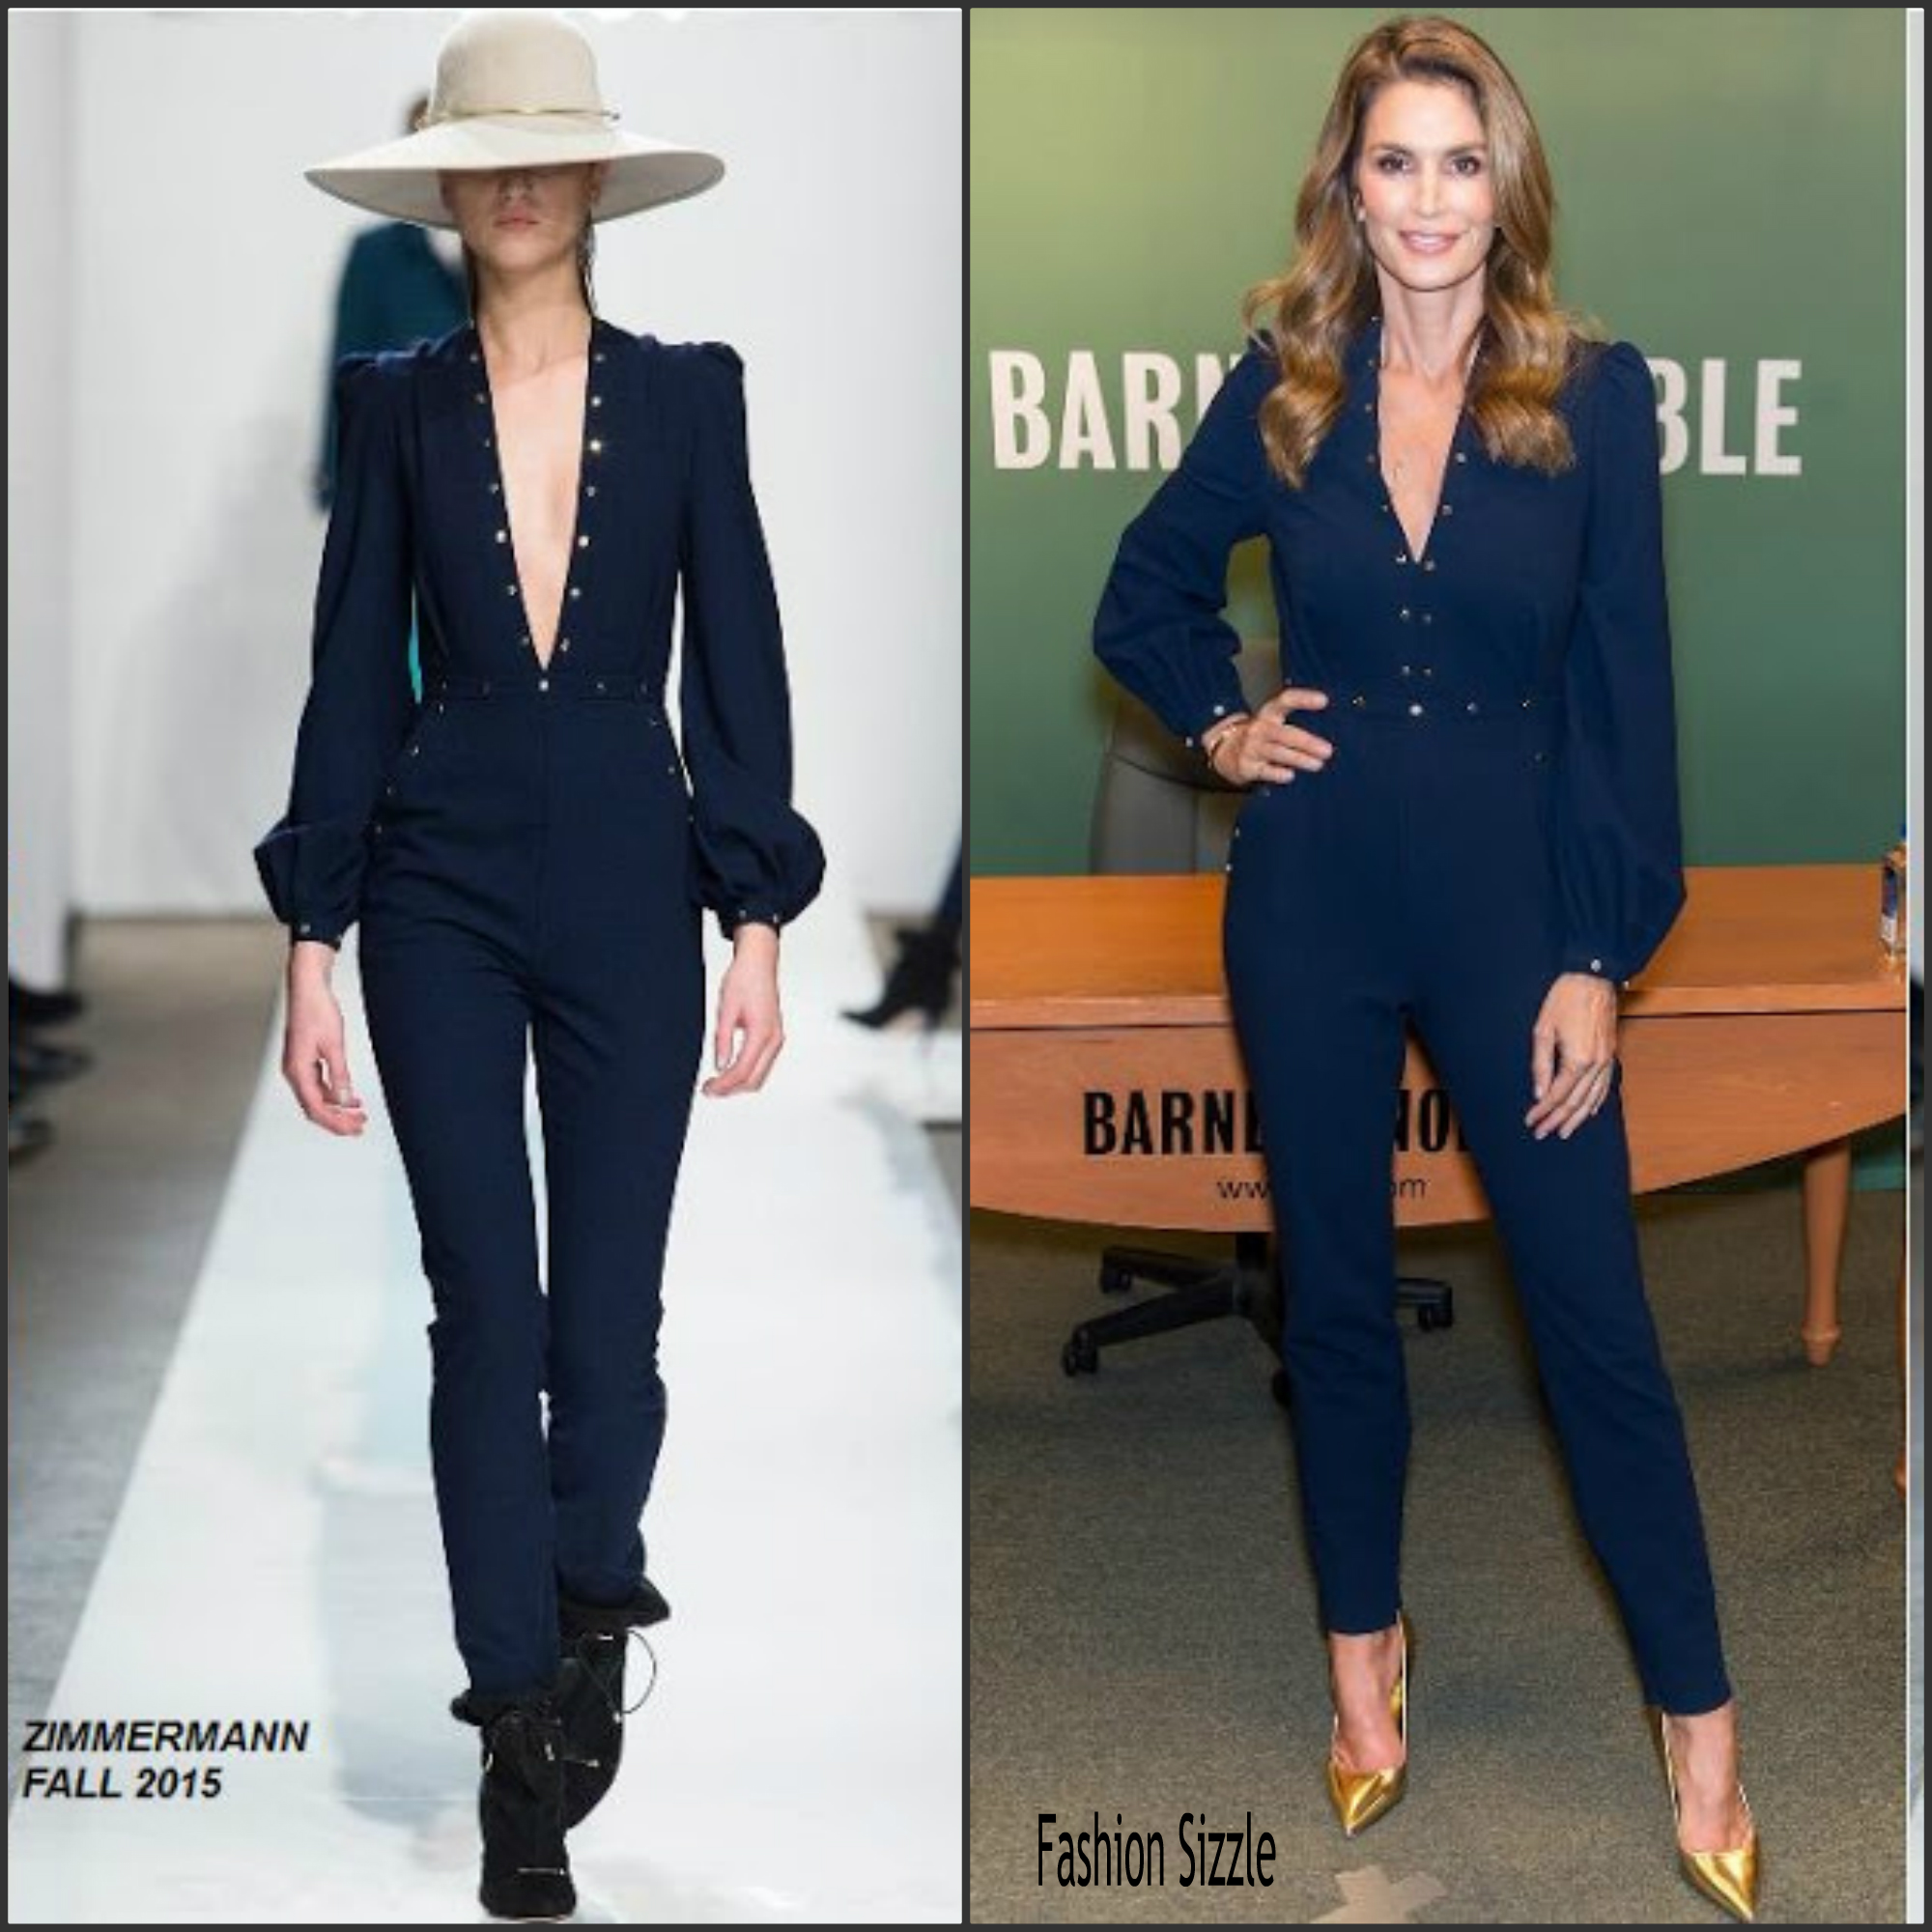 cindy-crawford-in-zimmermann-at-her-becoming-cindy-crawford-book-signing